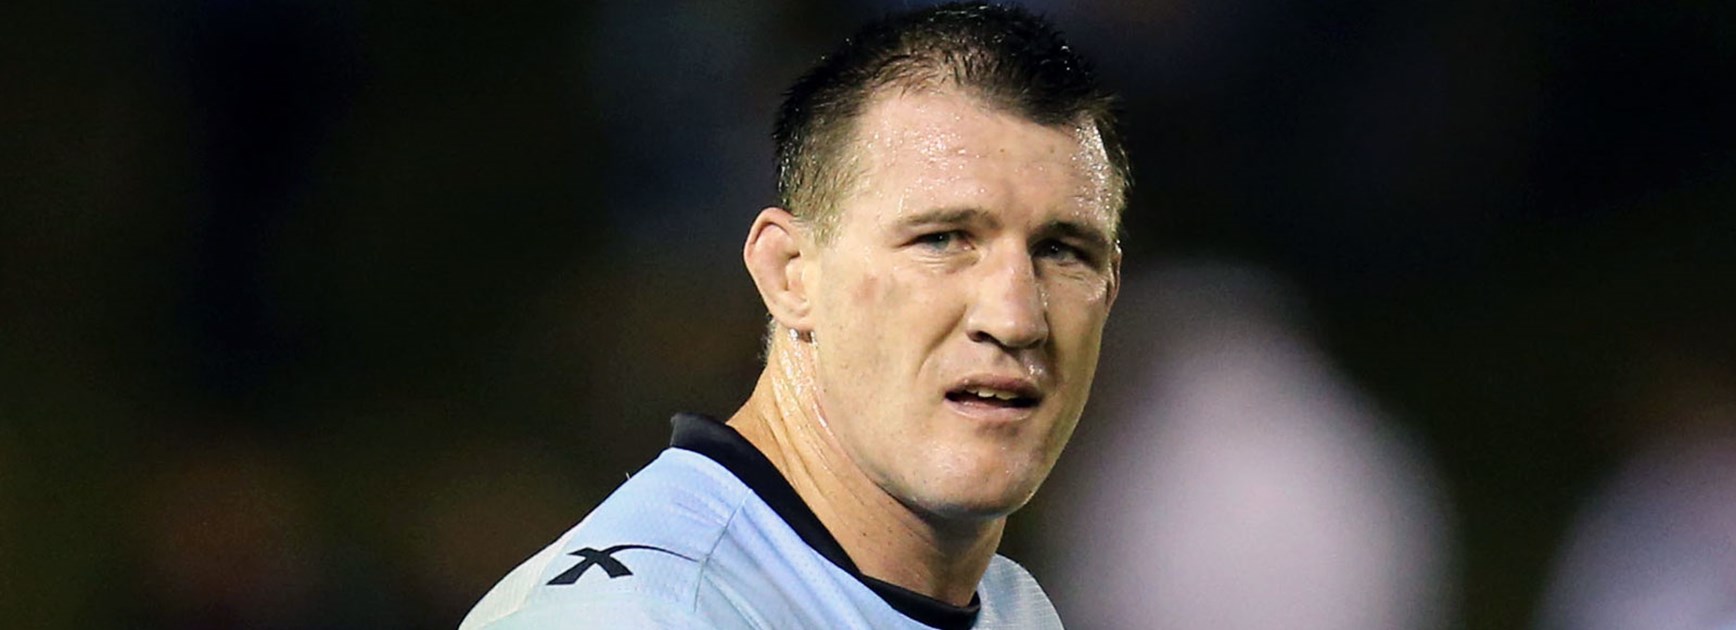 Paul Gallen has been ruled out of the Sharks' clash with Penrith and next week's Test against New Zealand.